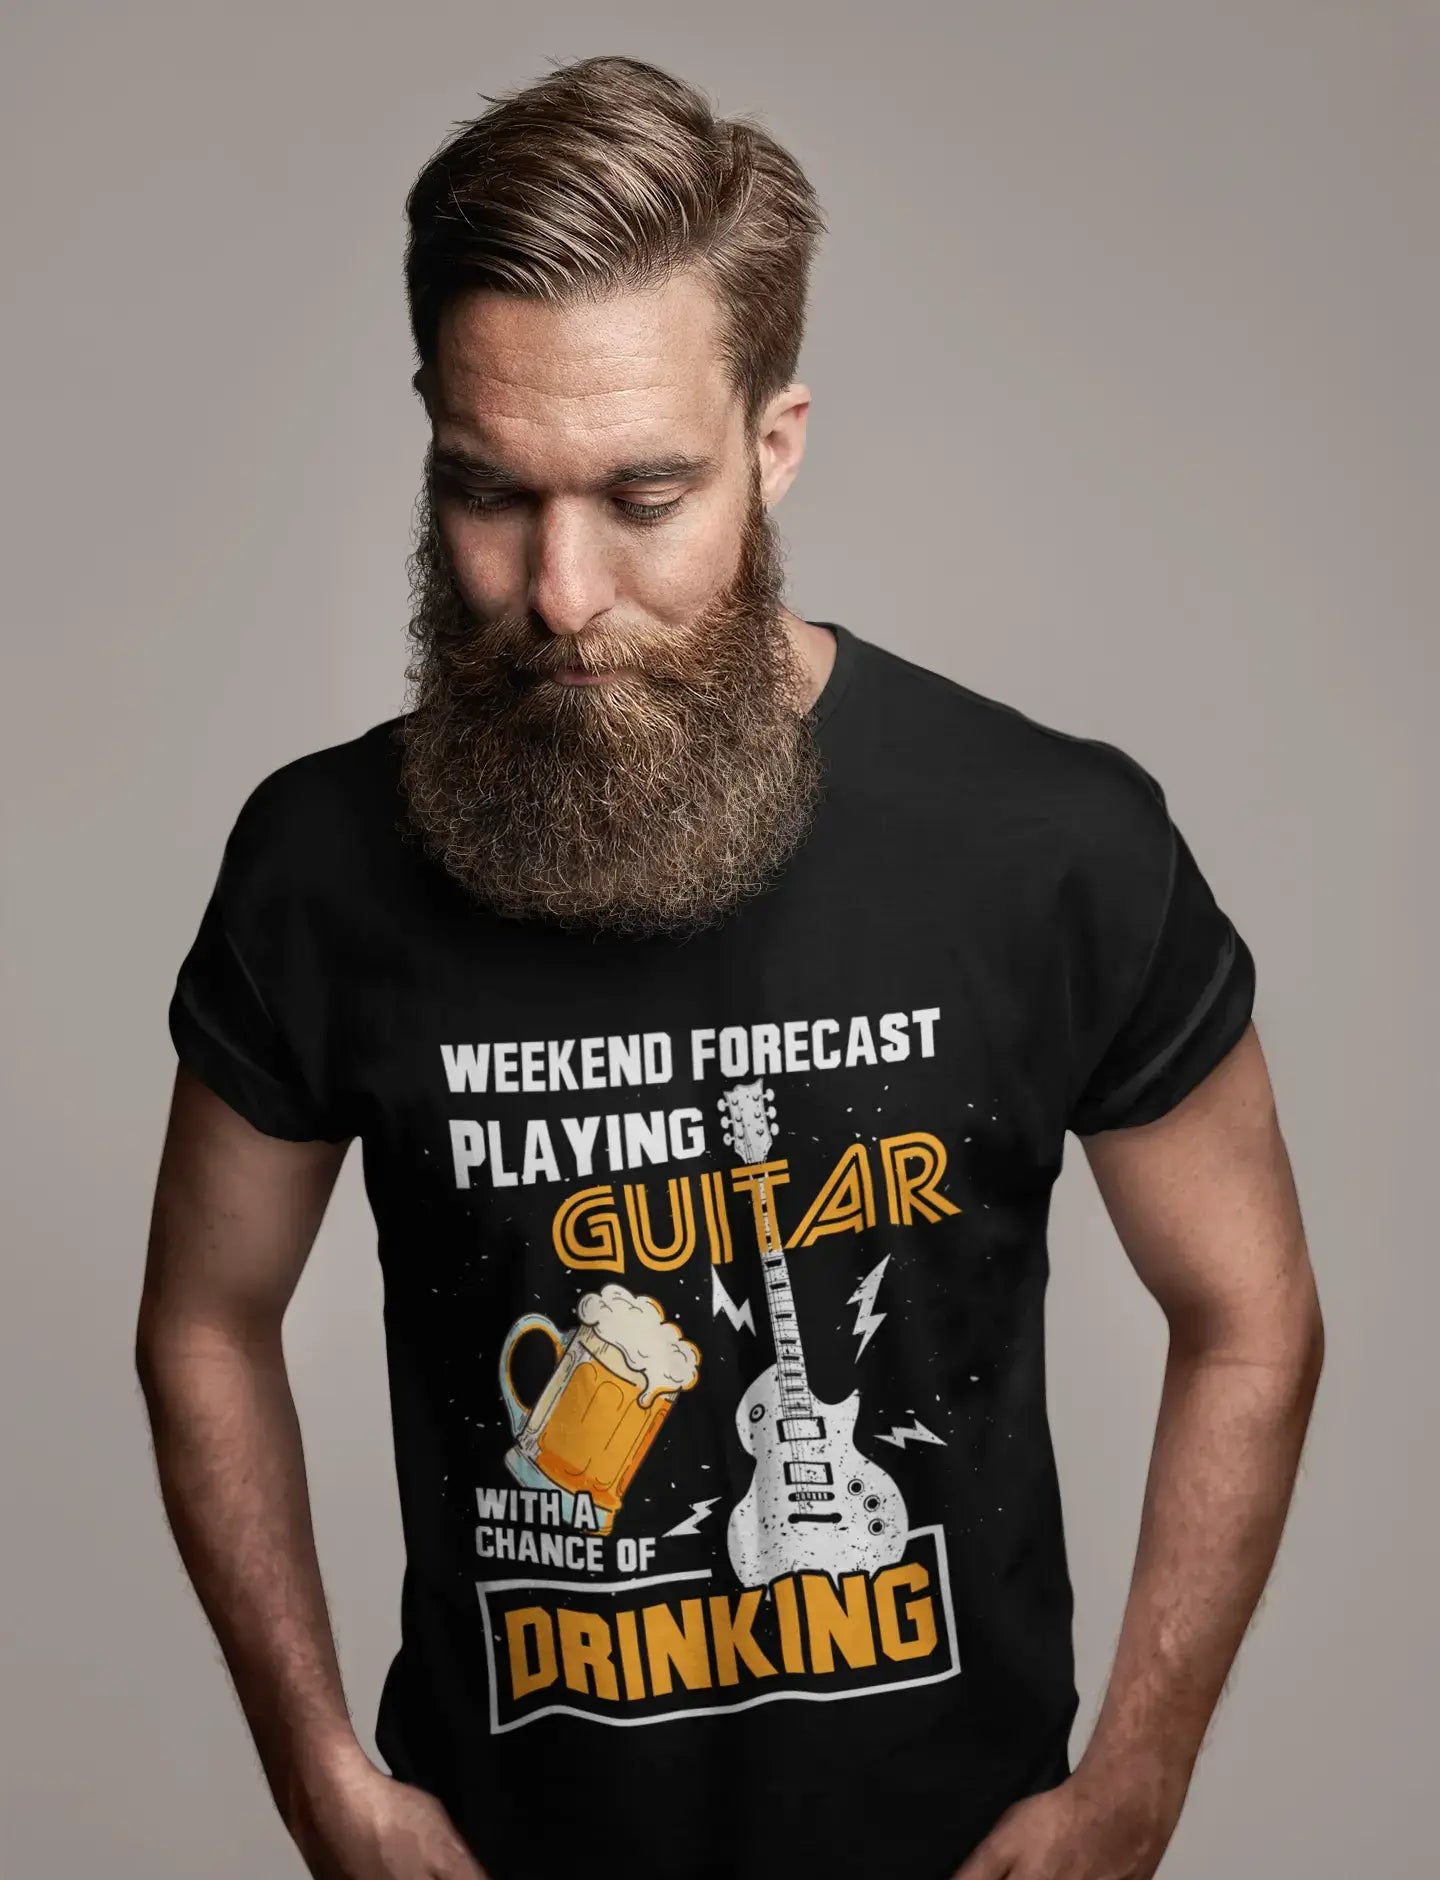 ULTRABASIC Men's T-Shirt Weekend Forecast Playing Guitar With a Chance of Drinking - Beer Lover Tee Shirt